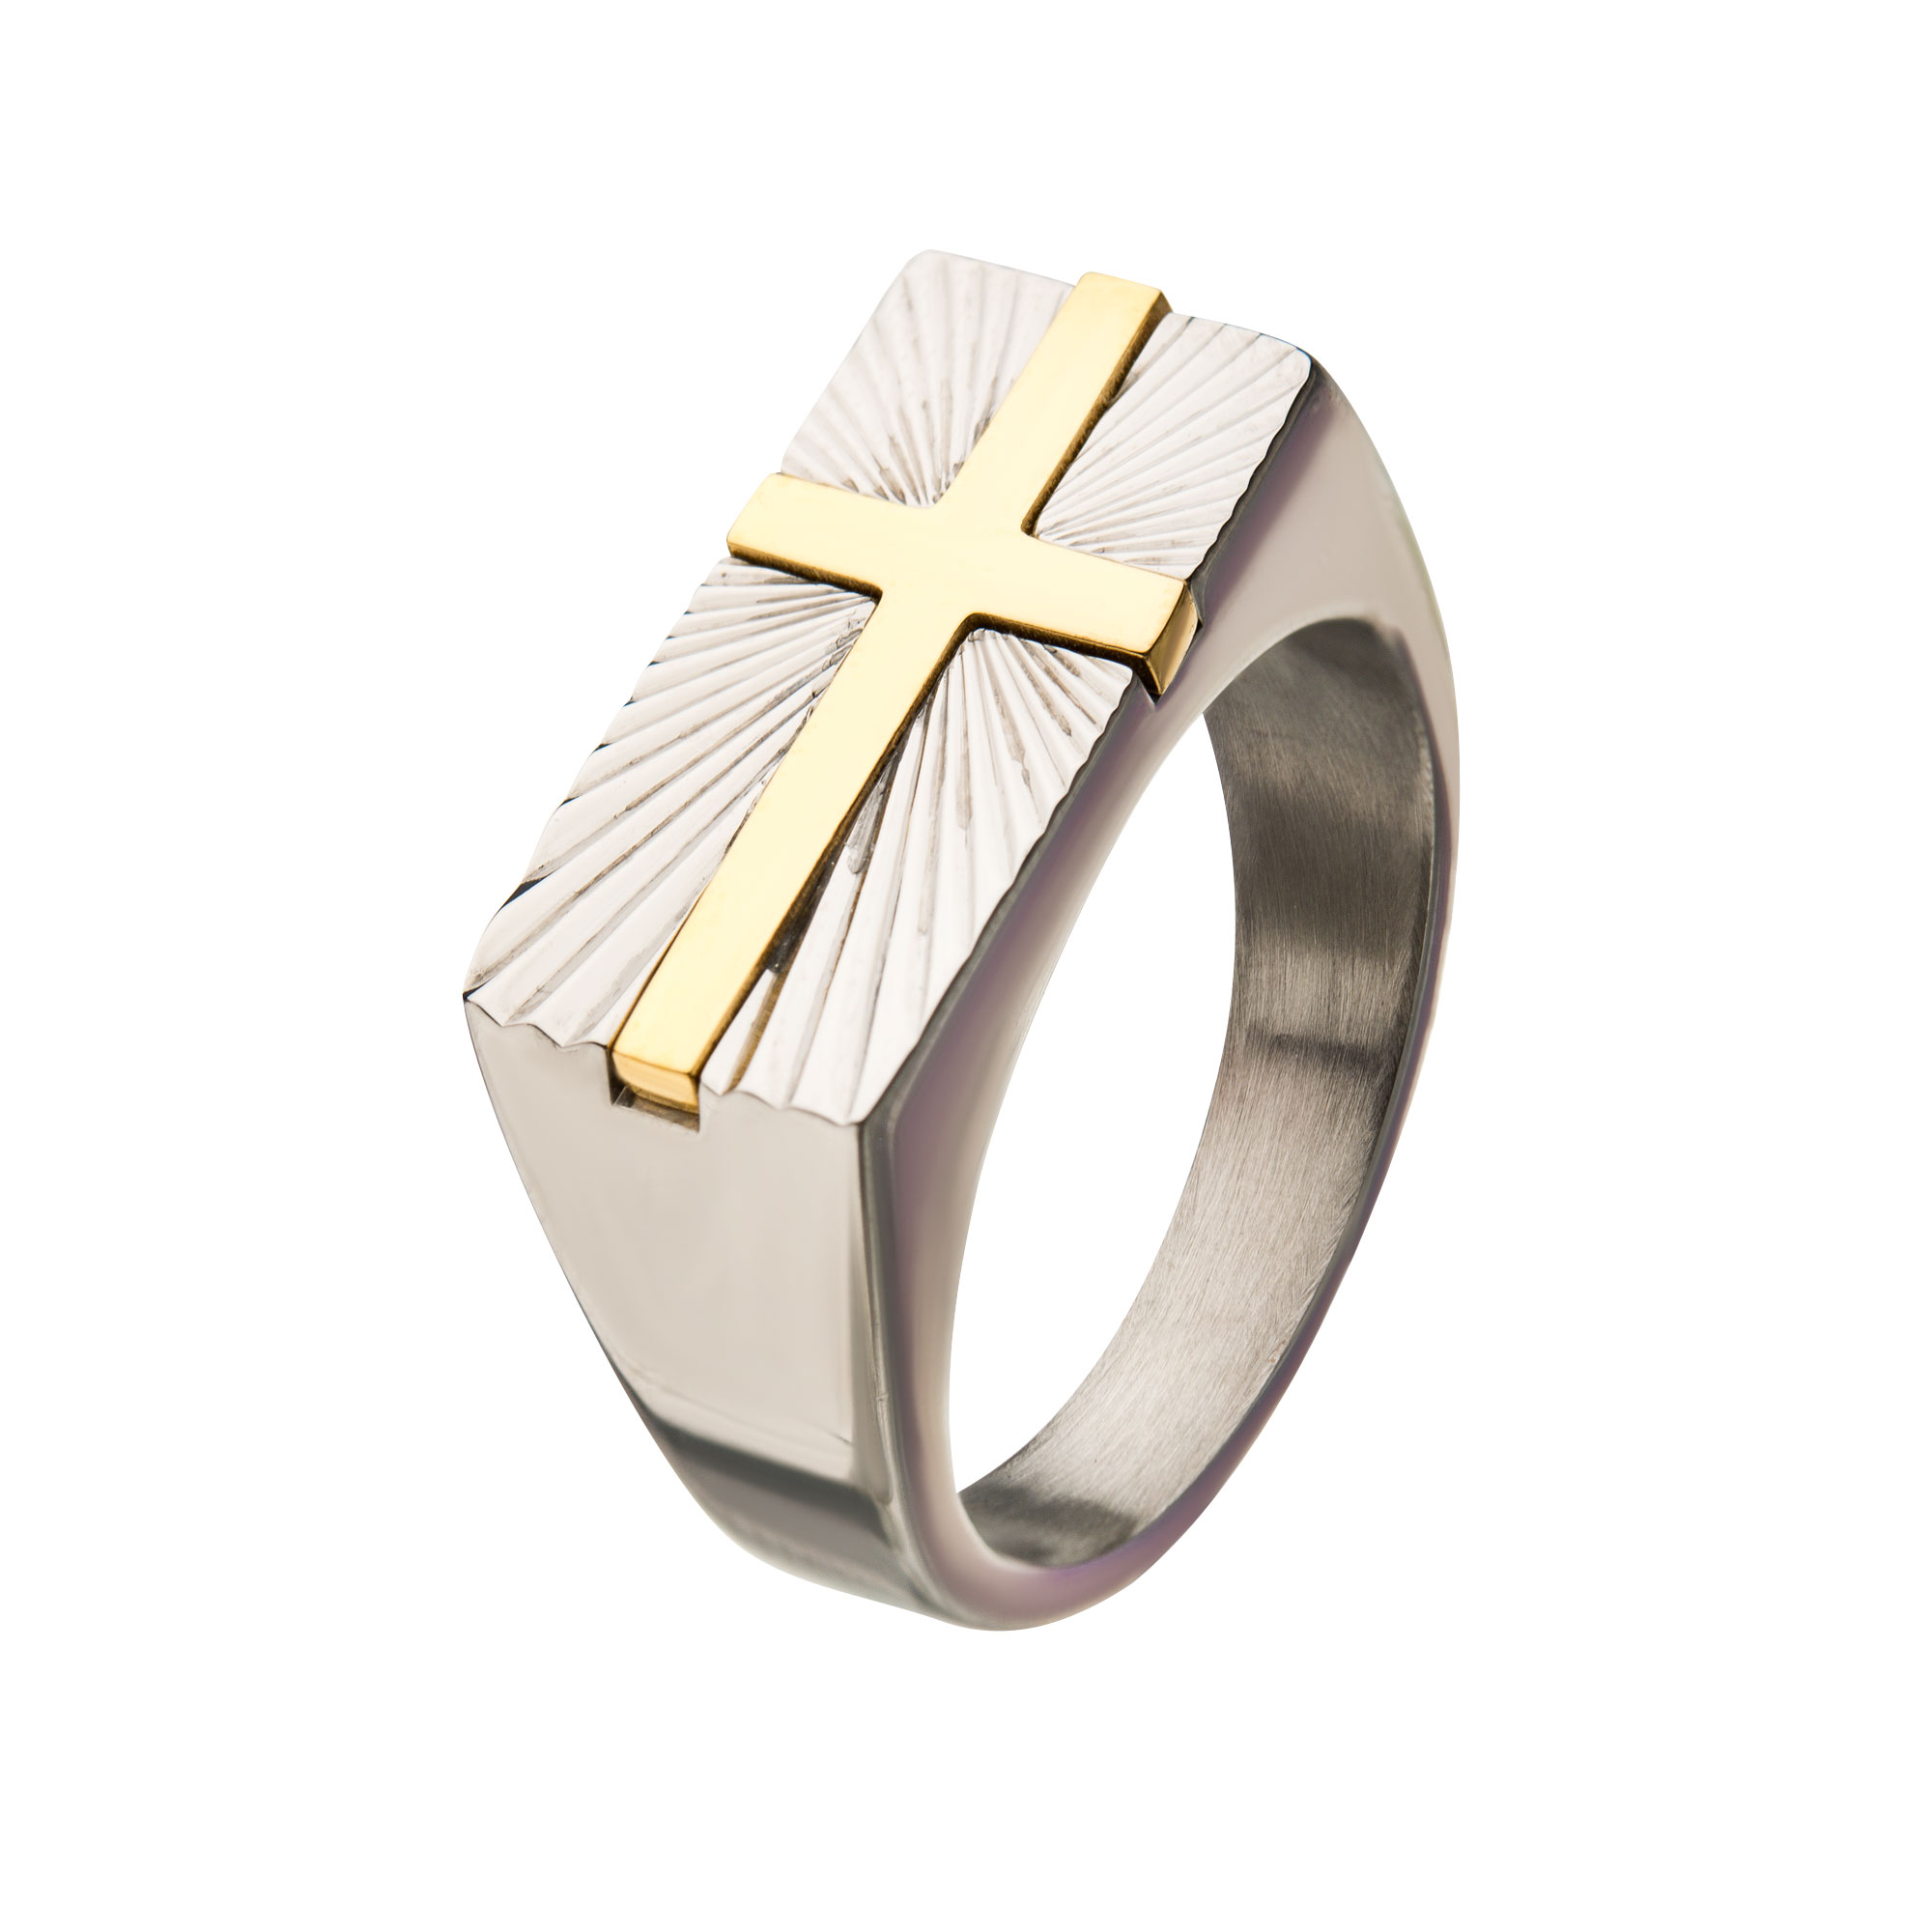 Stainless Steel with  Gold Plated Transfiguration Cross Ring Jayson Jewelers Cape Girardeau, MO